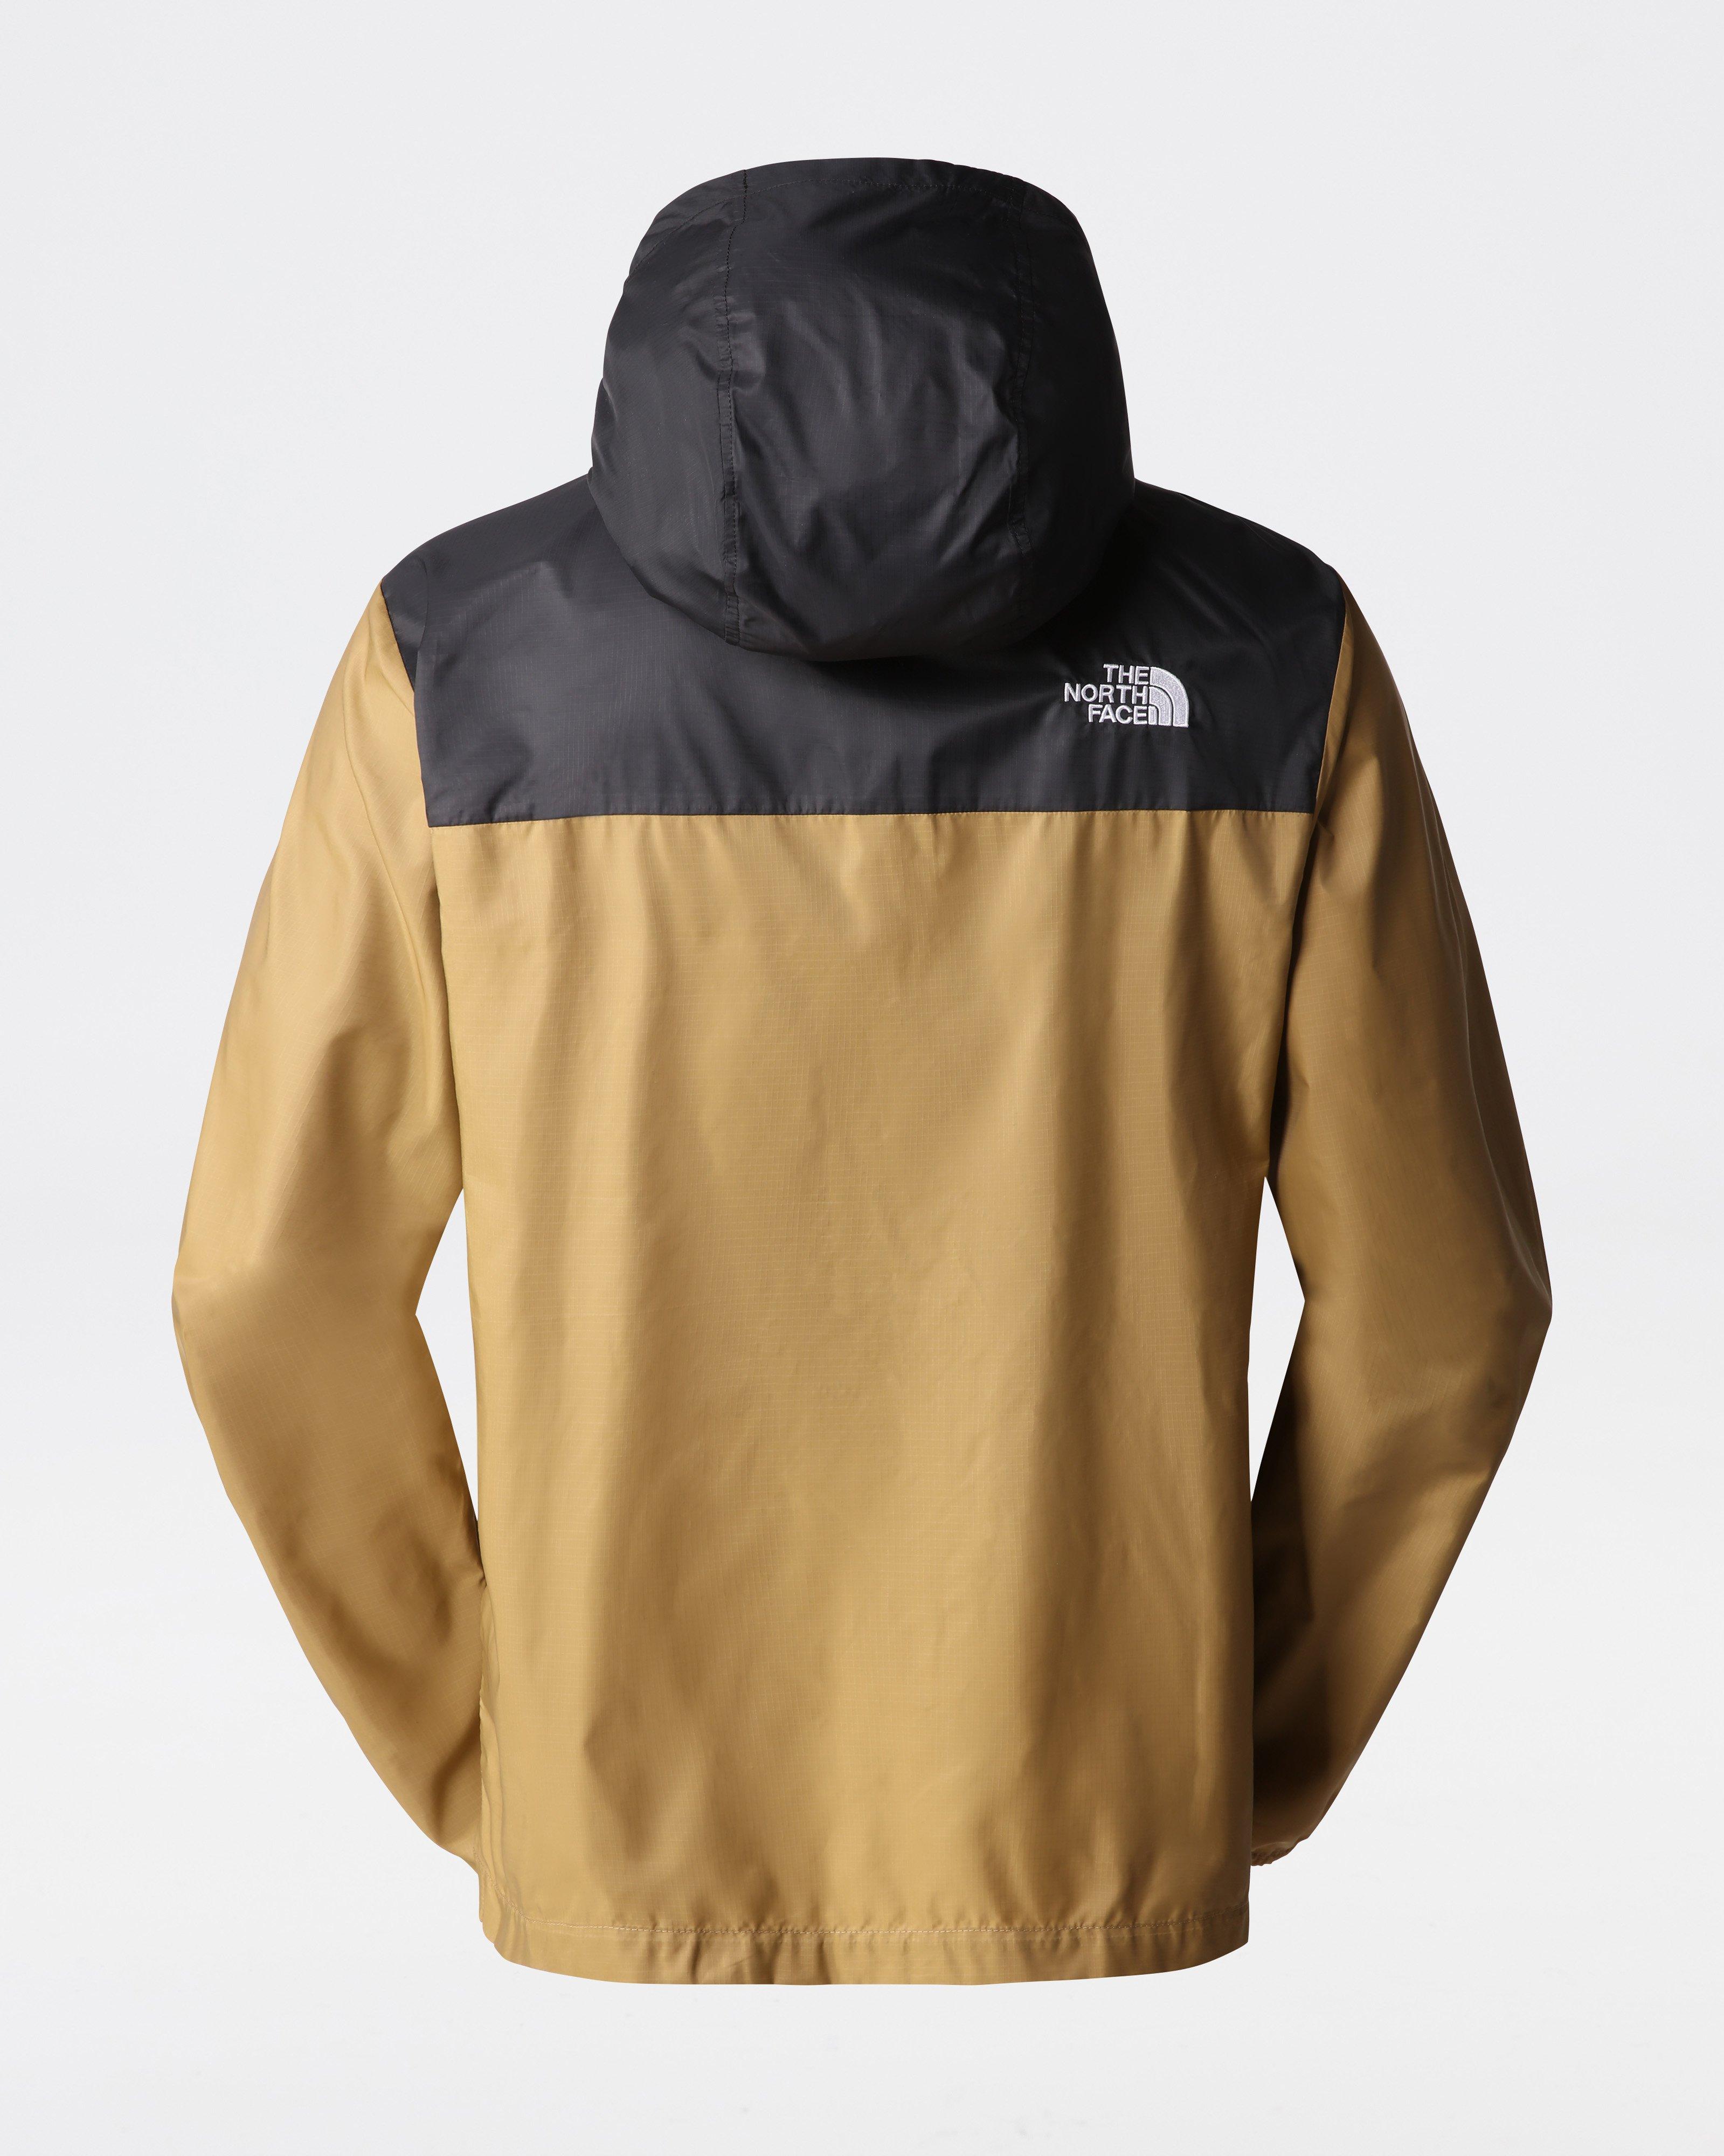 The North Face Men's Cyclone Jacket 3 -  Brown